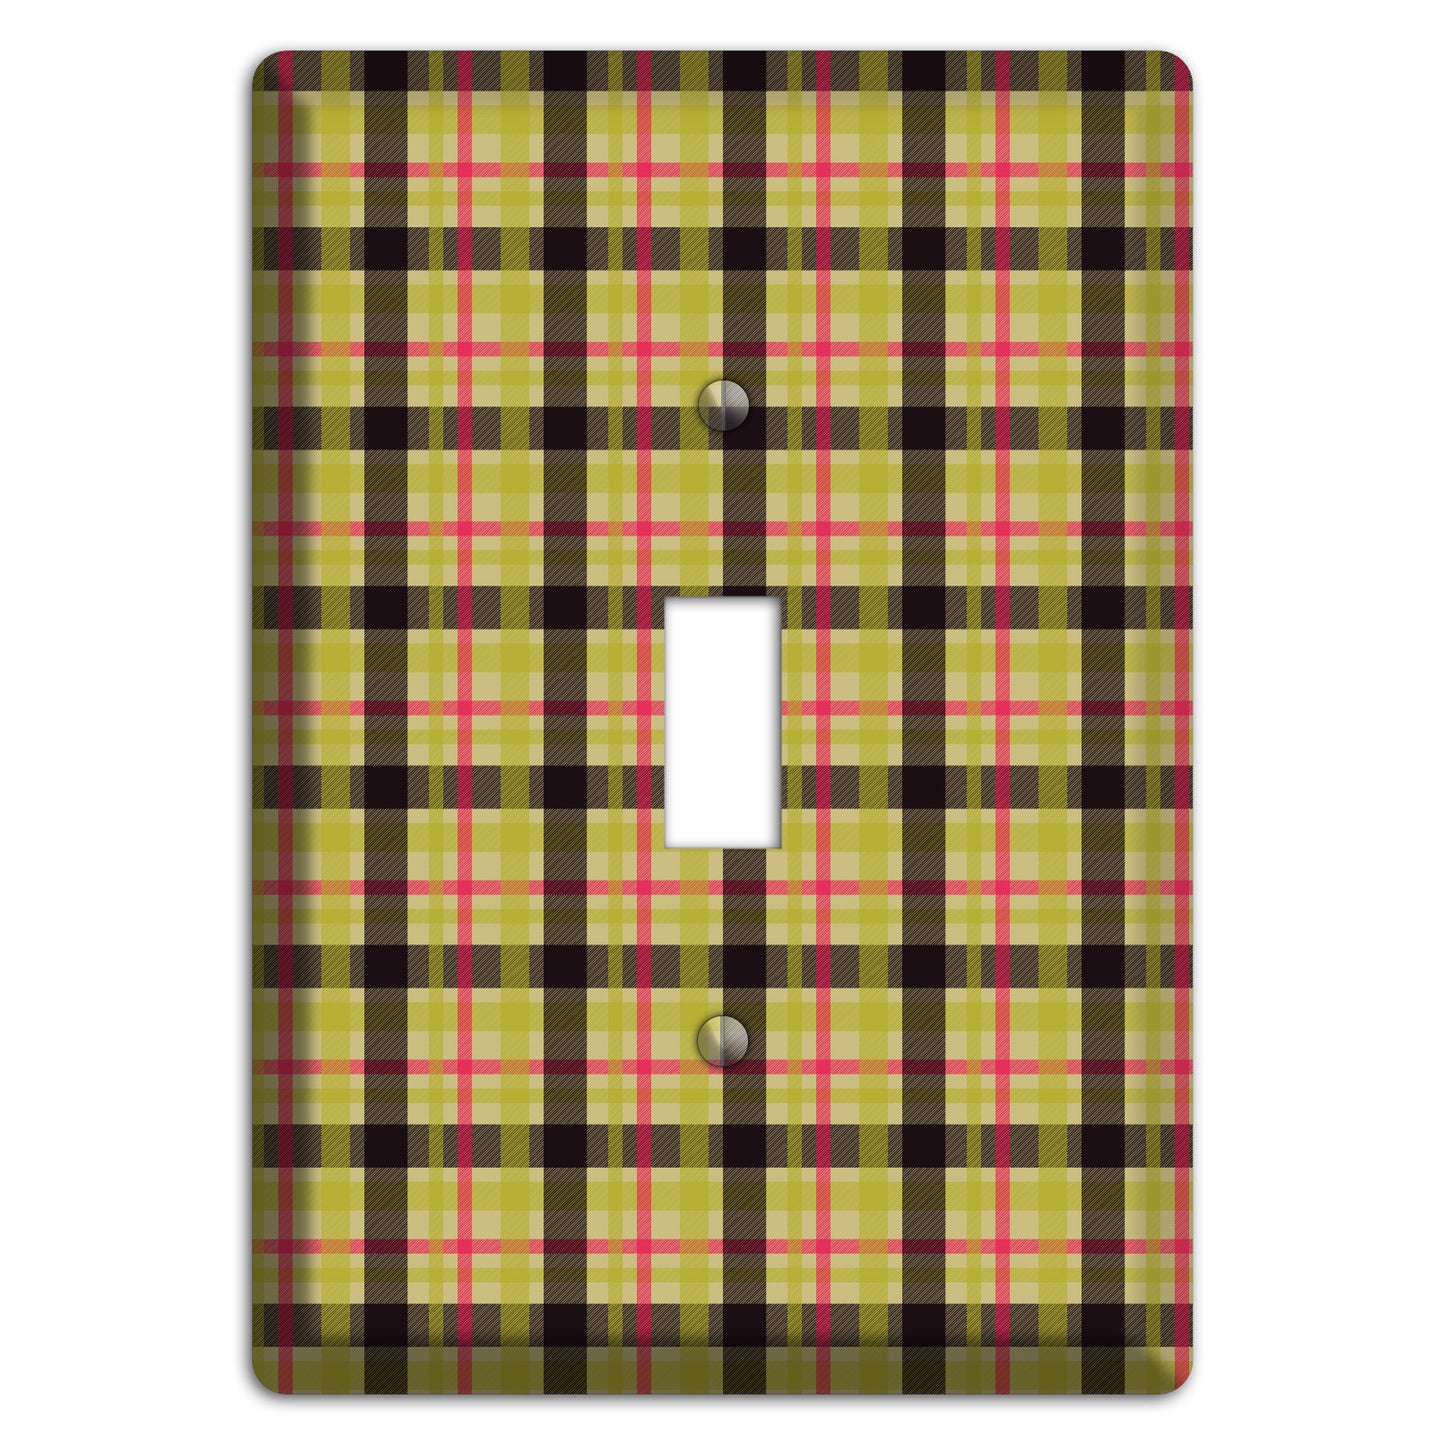 Yellow Black Red Plaid Cover Plates